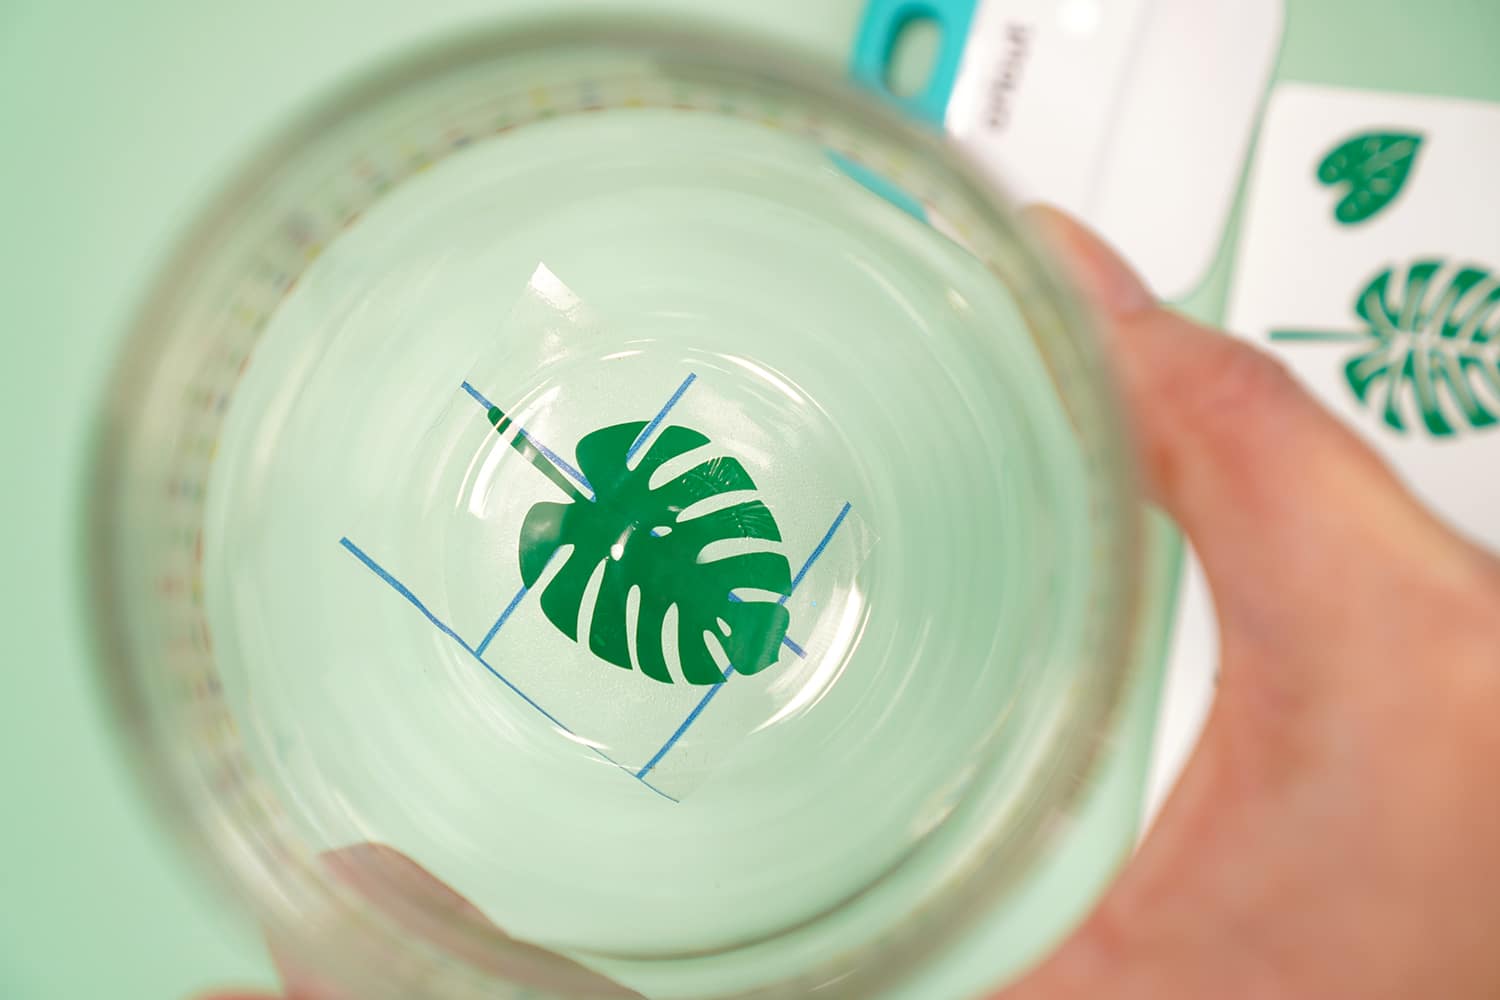 Placing a leaf decal in the center of a stemless wine glass